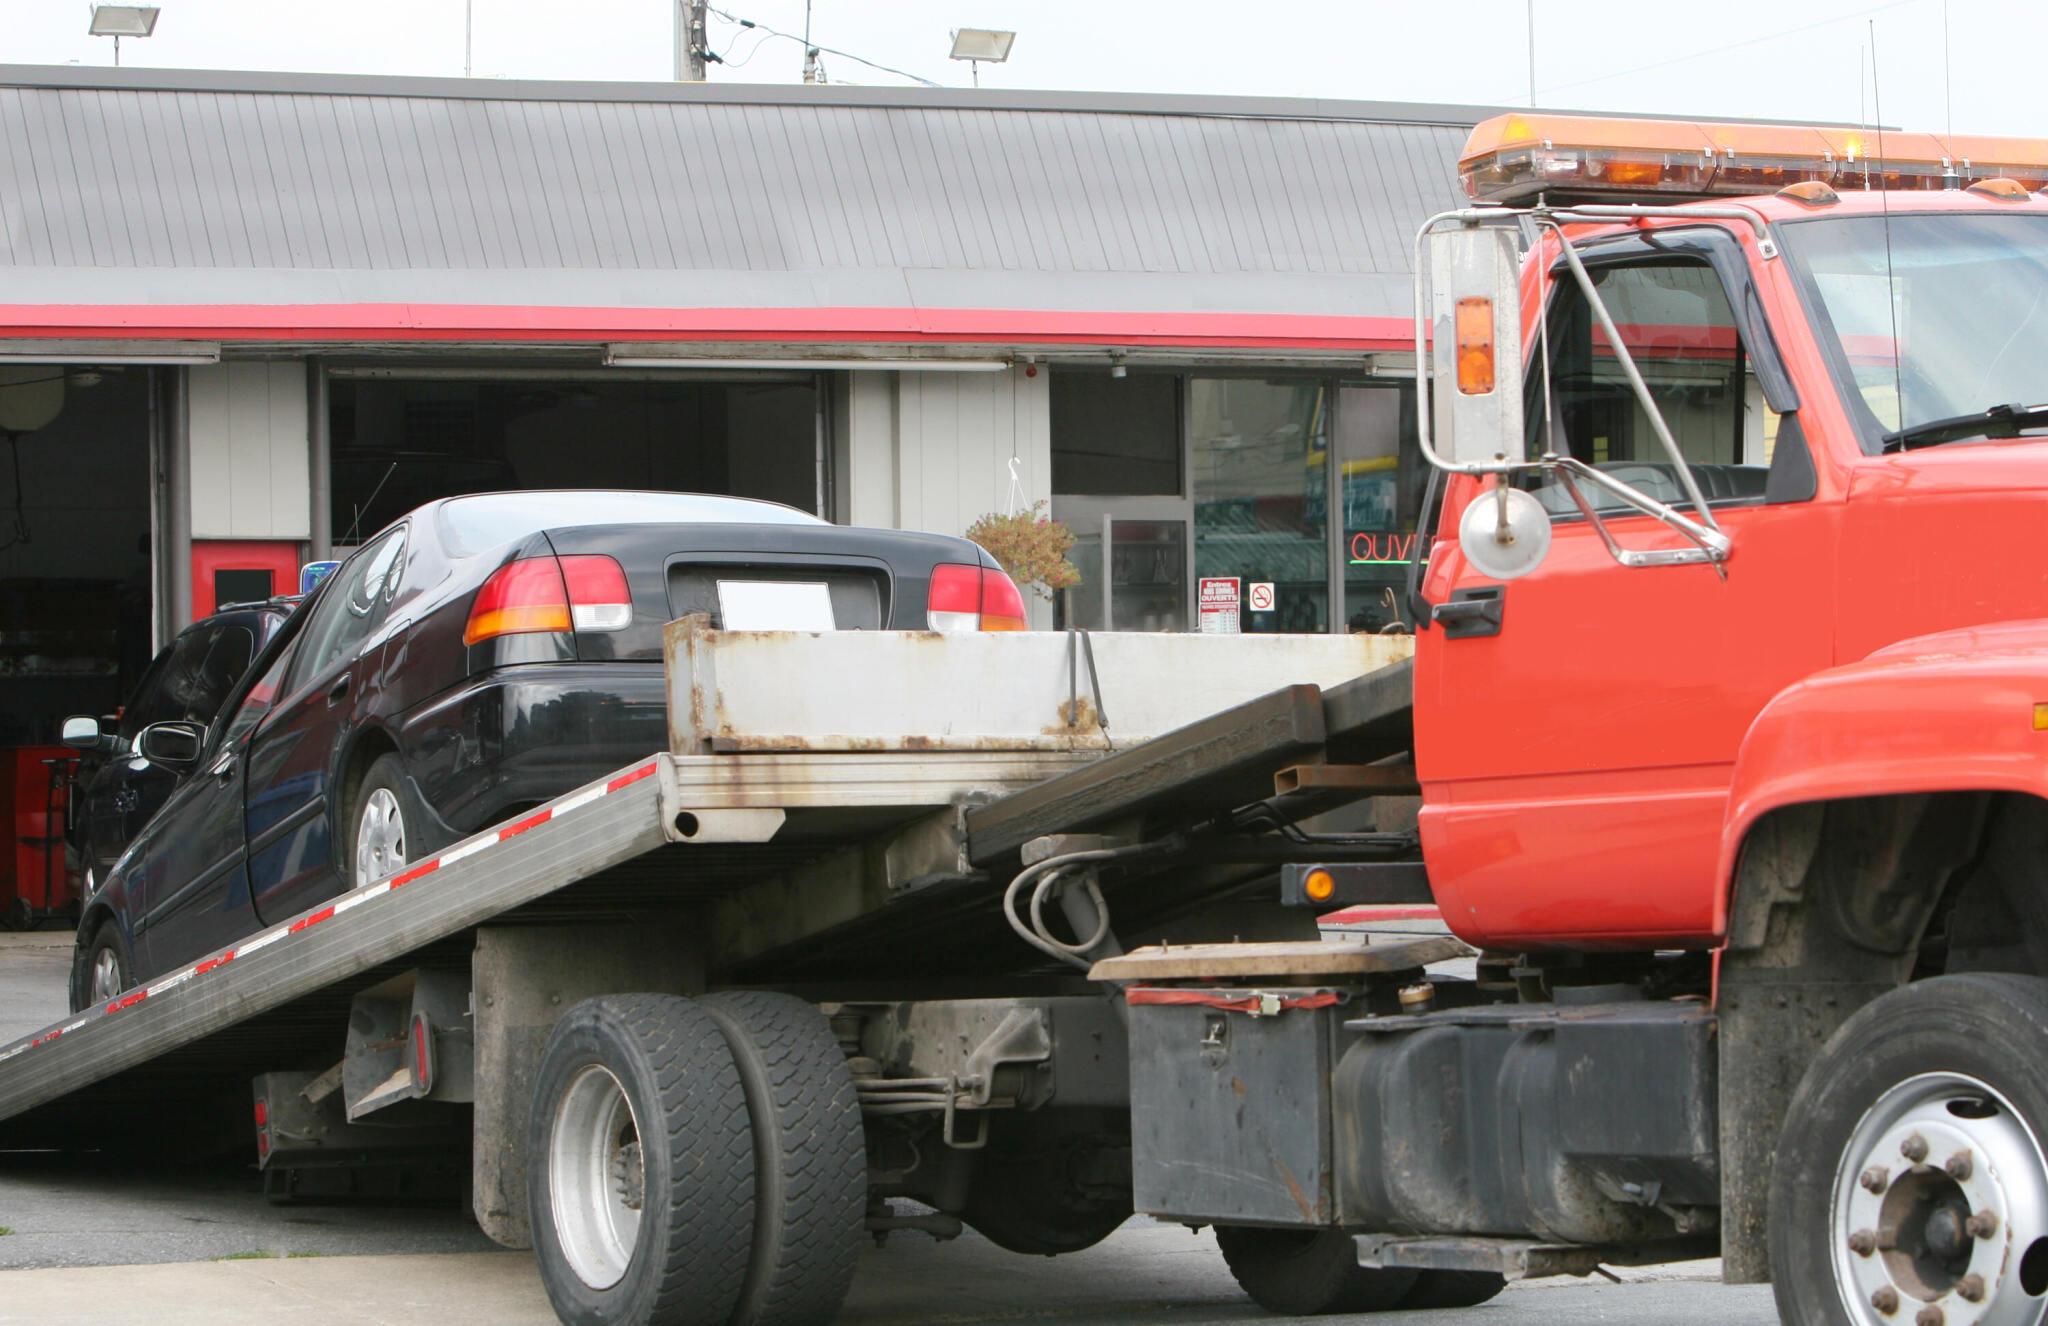 Valdosta Towing Company: Elevating Your Expectations with Exceptional Services